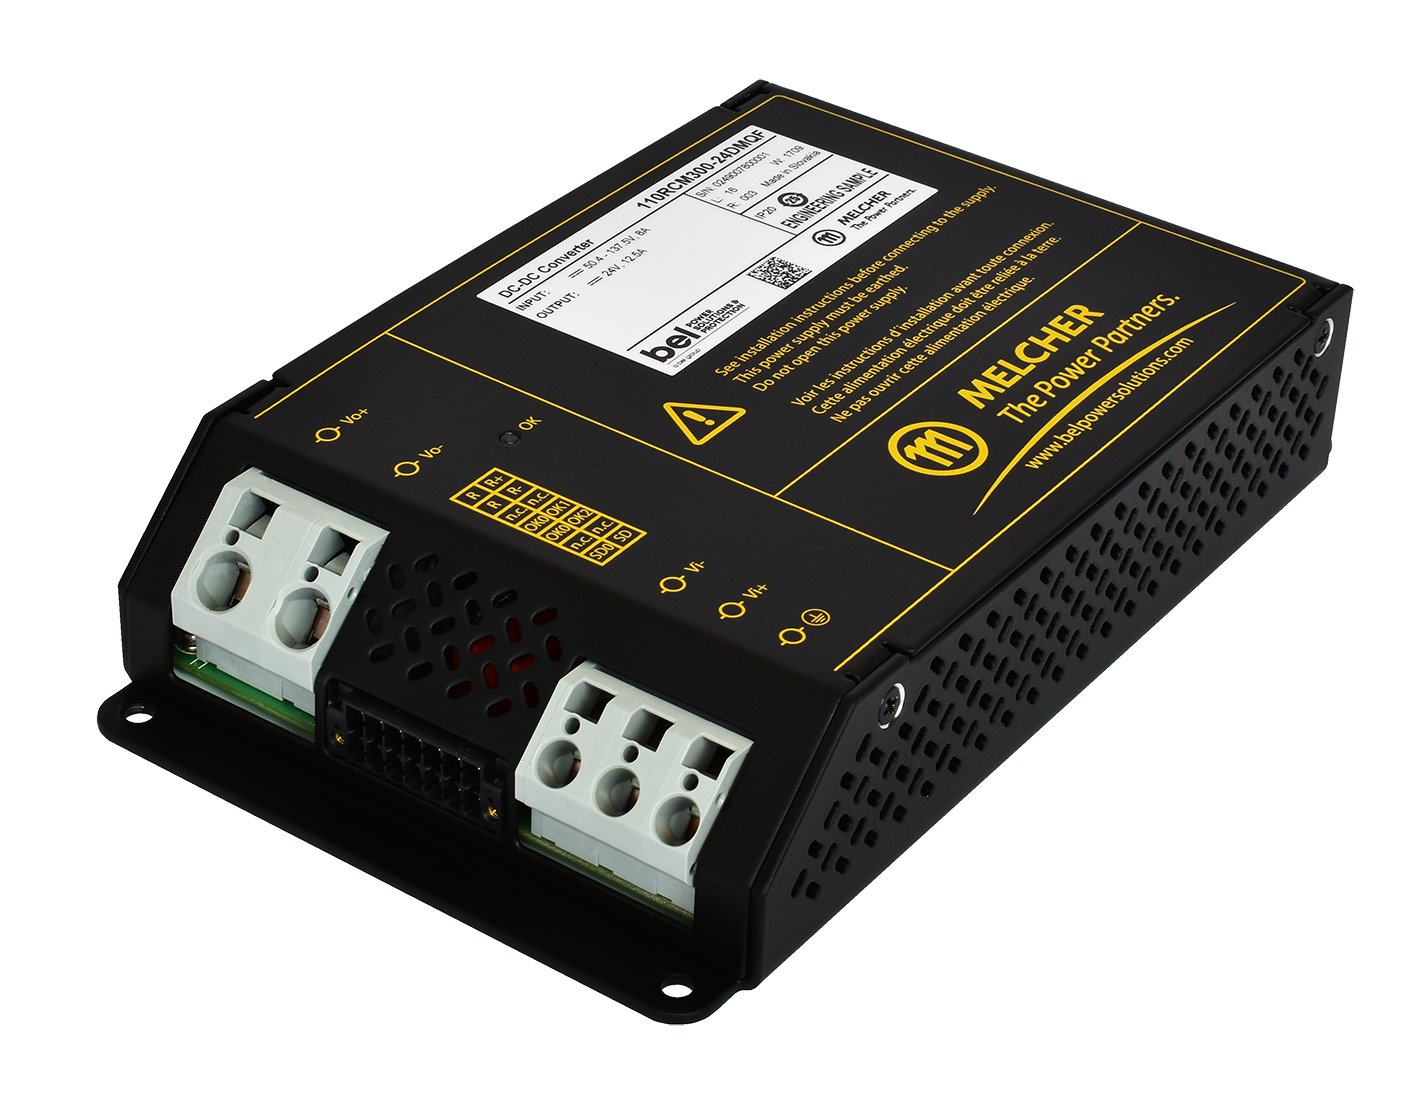 Chassis-Mount 150 W and 300 W DC-DC Converters Intended for Railway Applications